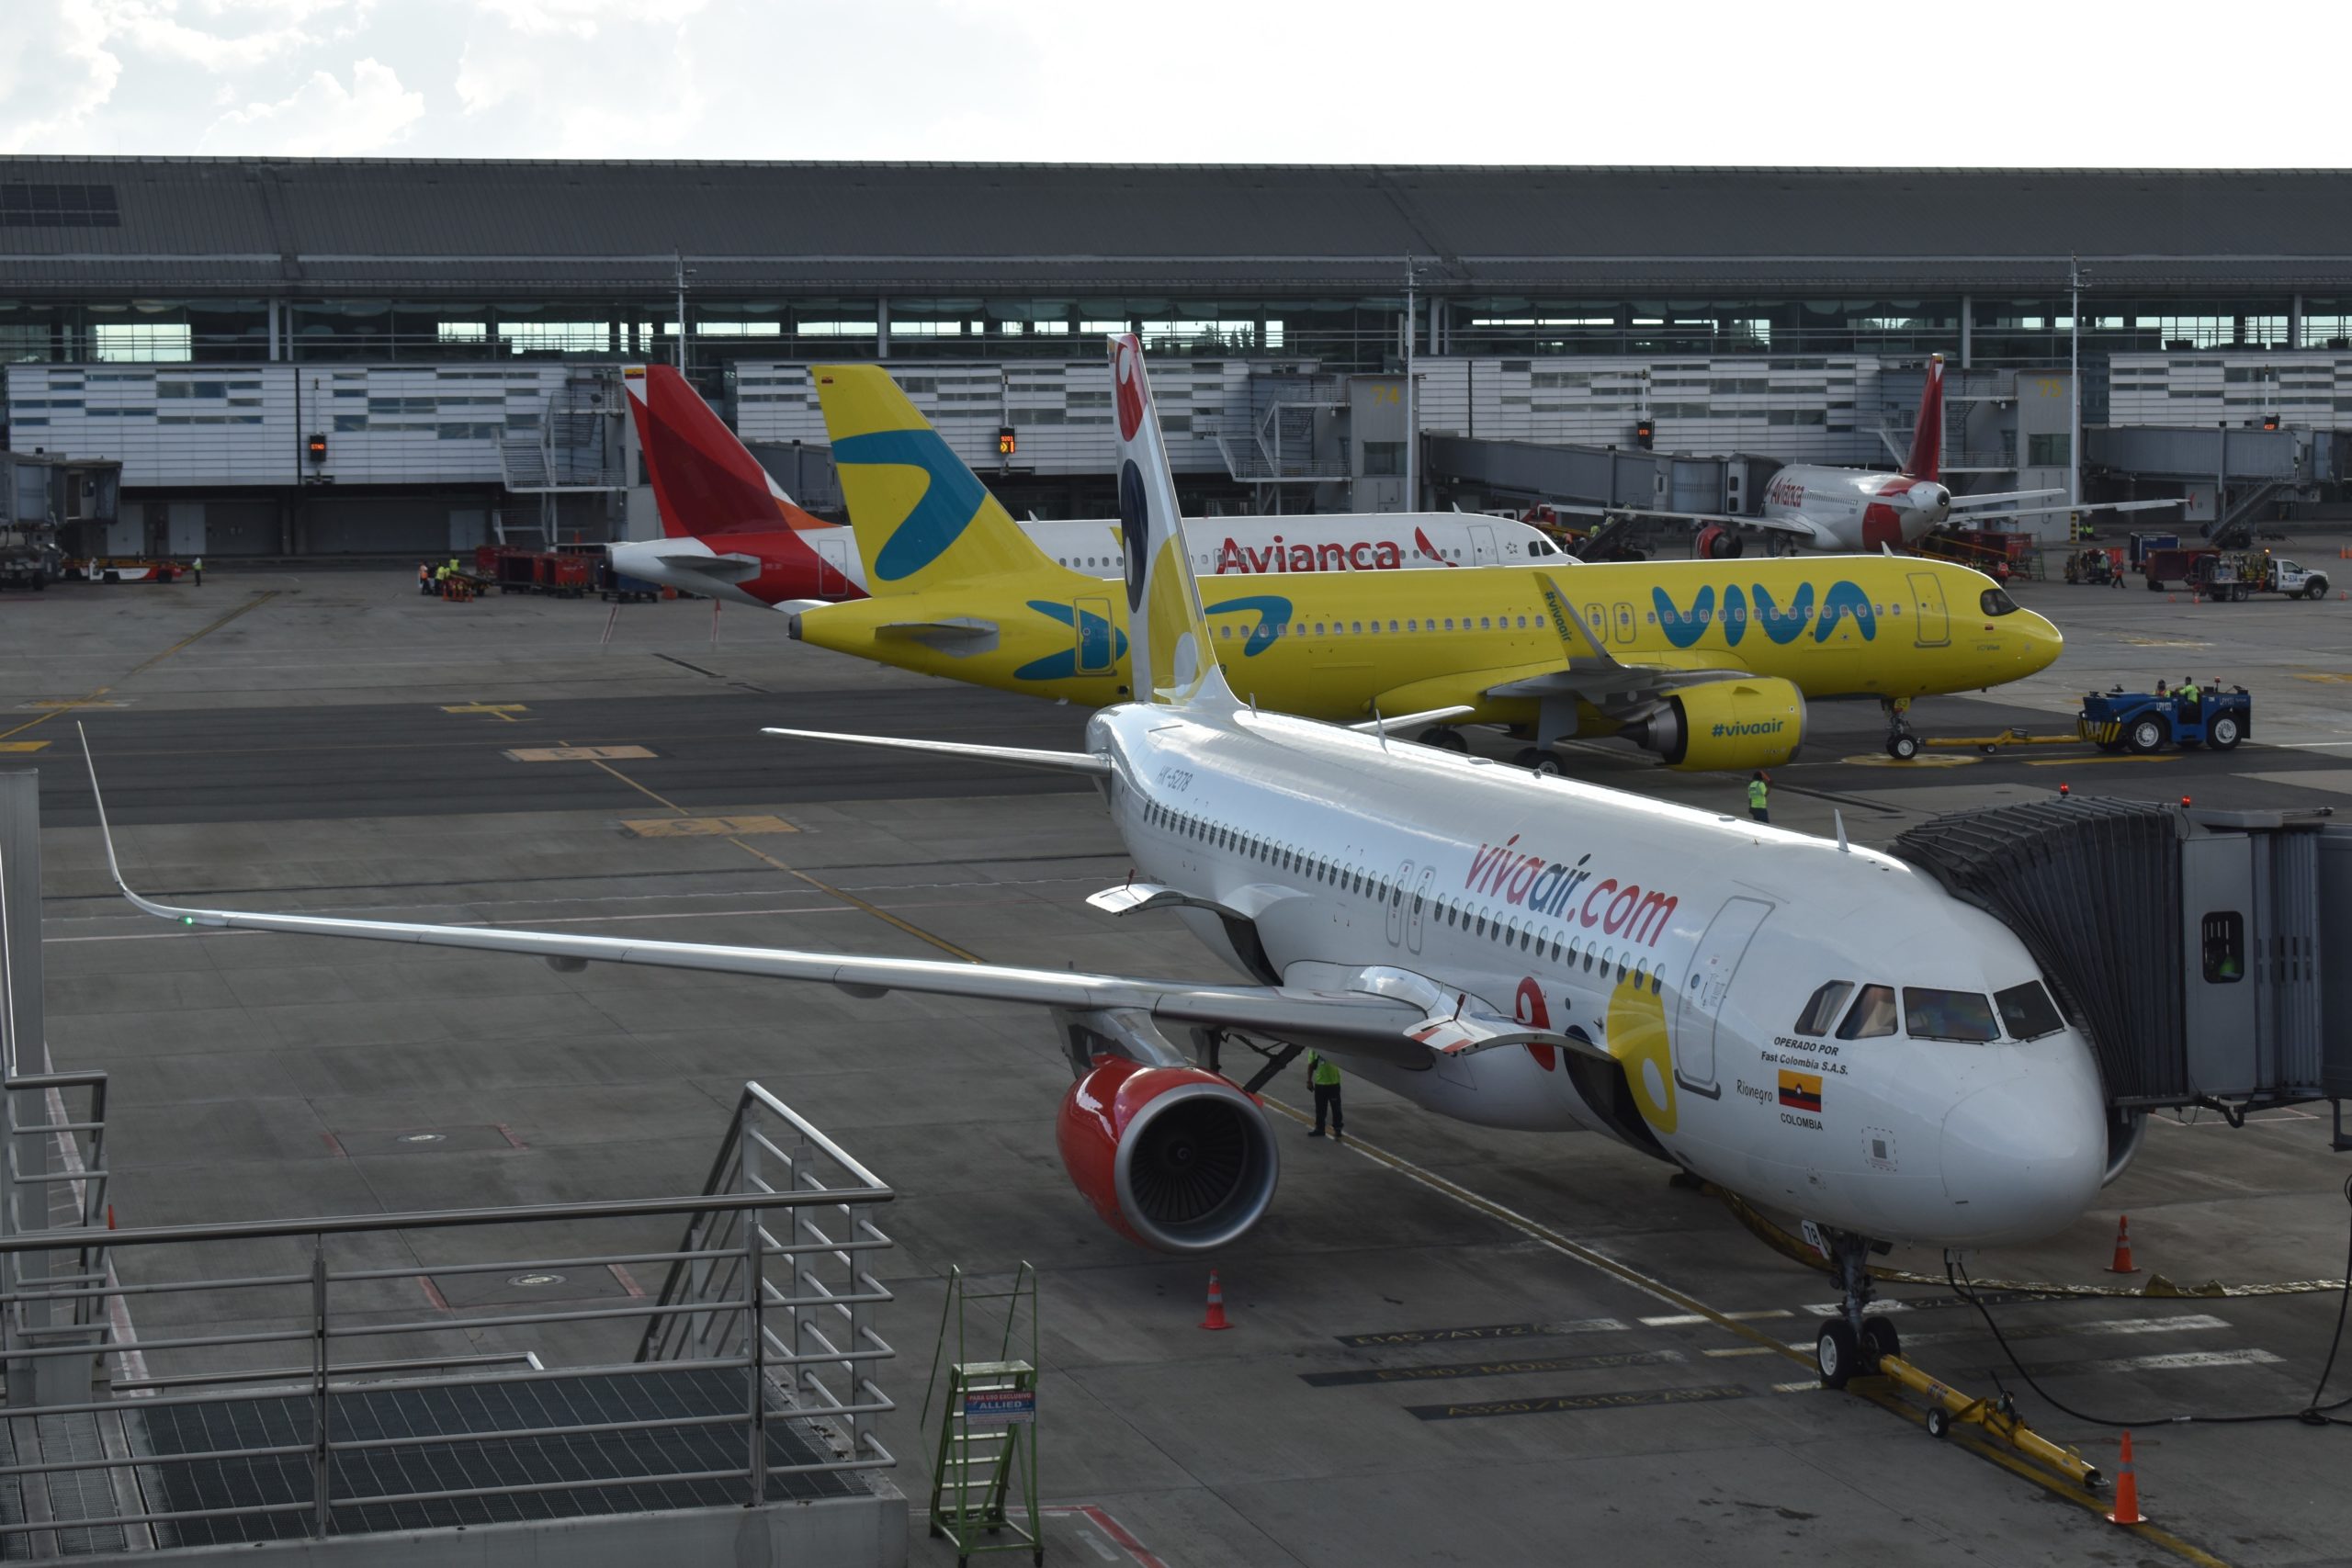 My Experience Flying Viva Air Colombia During COVID-19